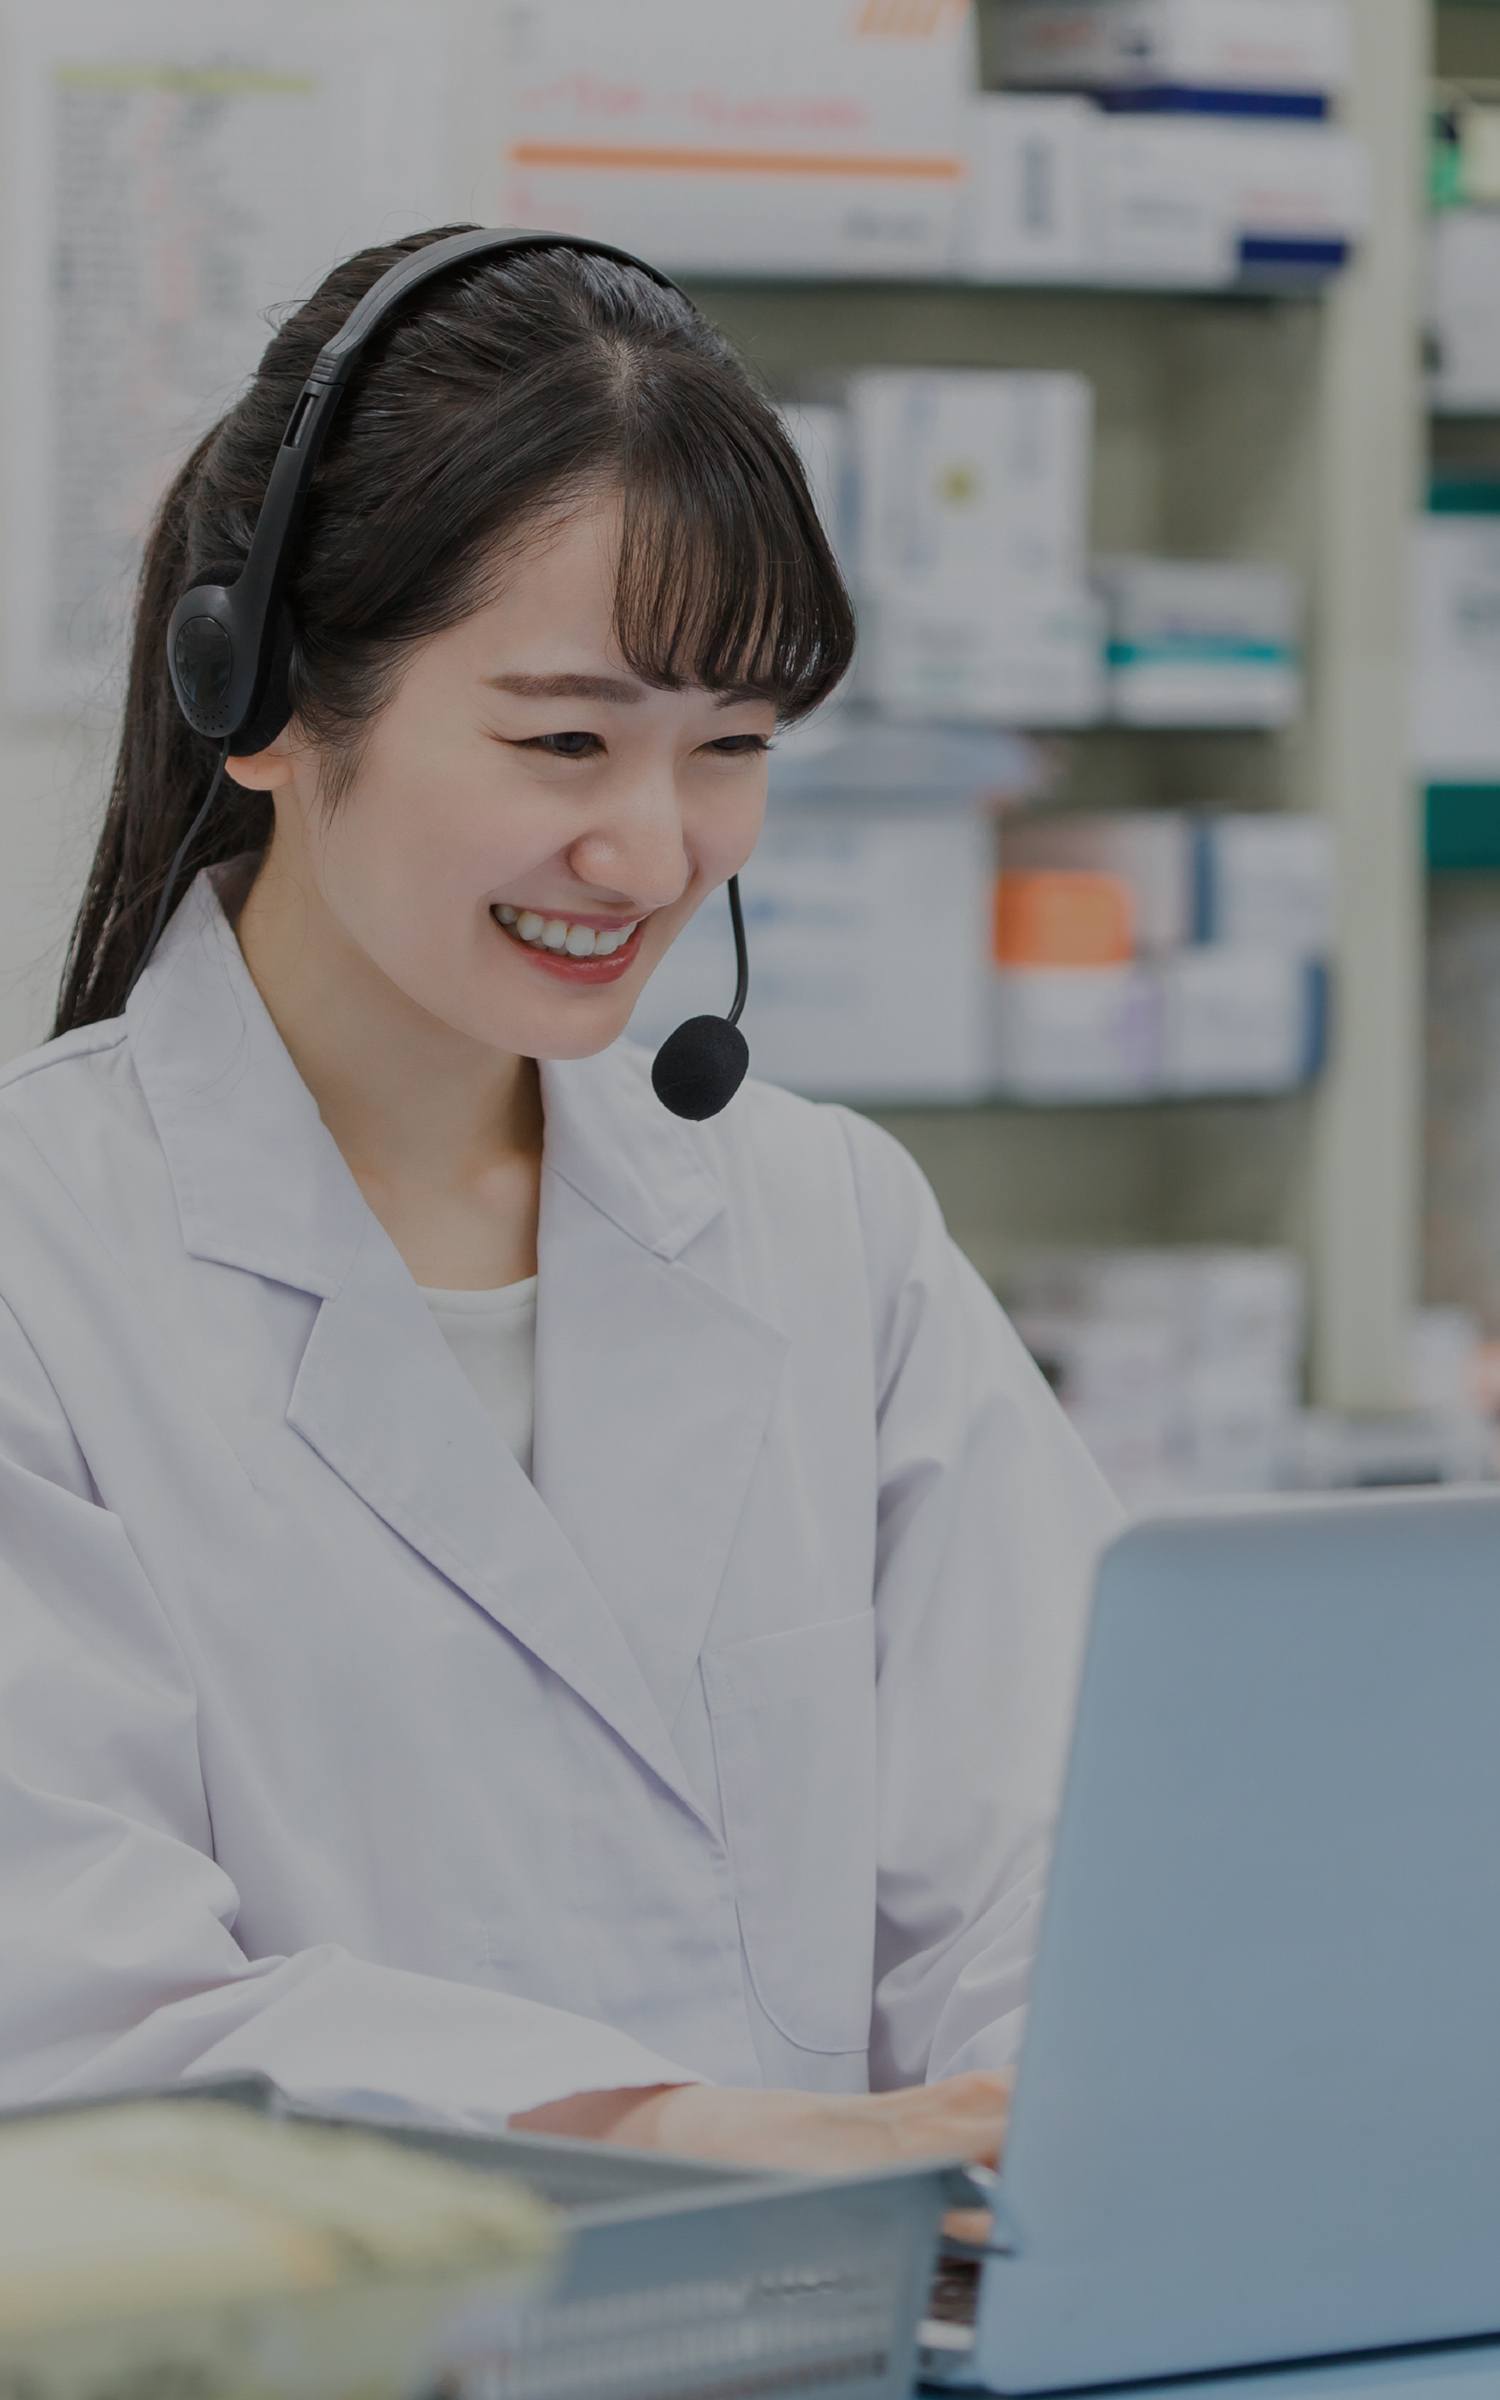 Pharmacies enter a new stage 薬局は、新たなステージへ。